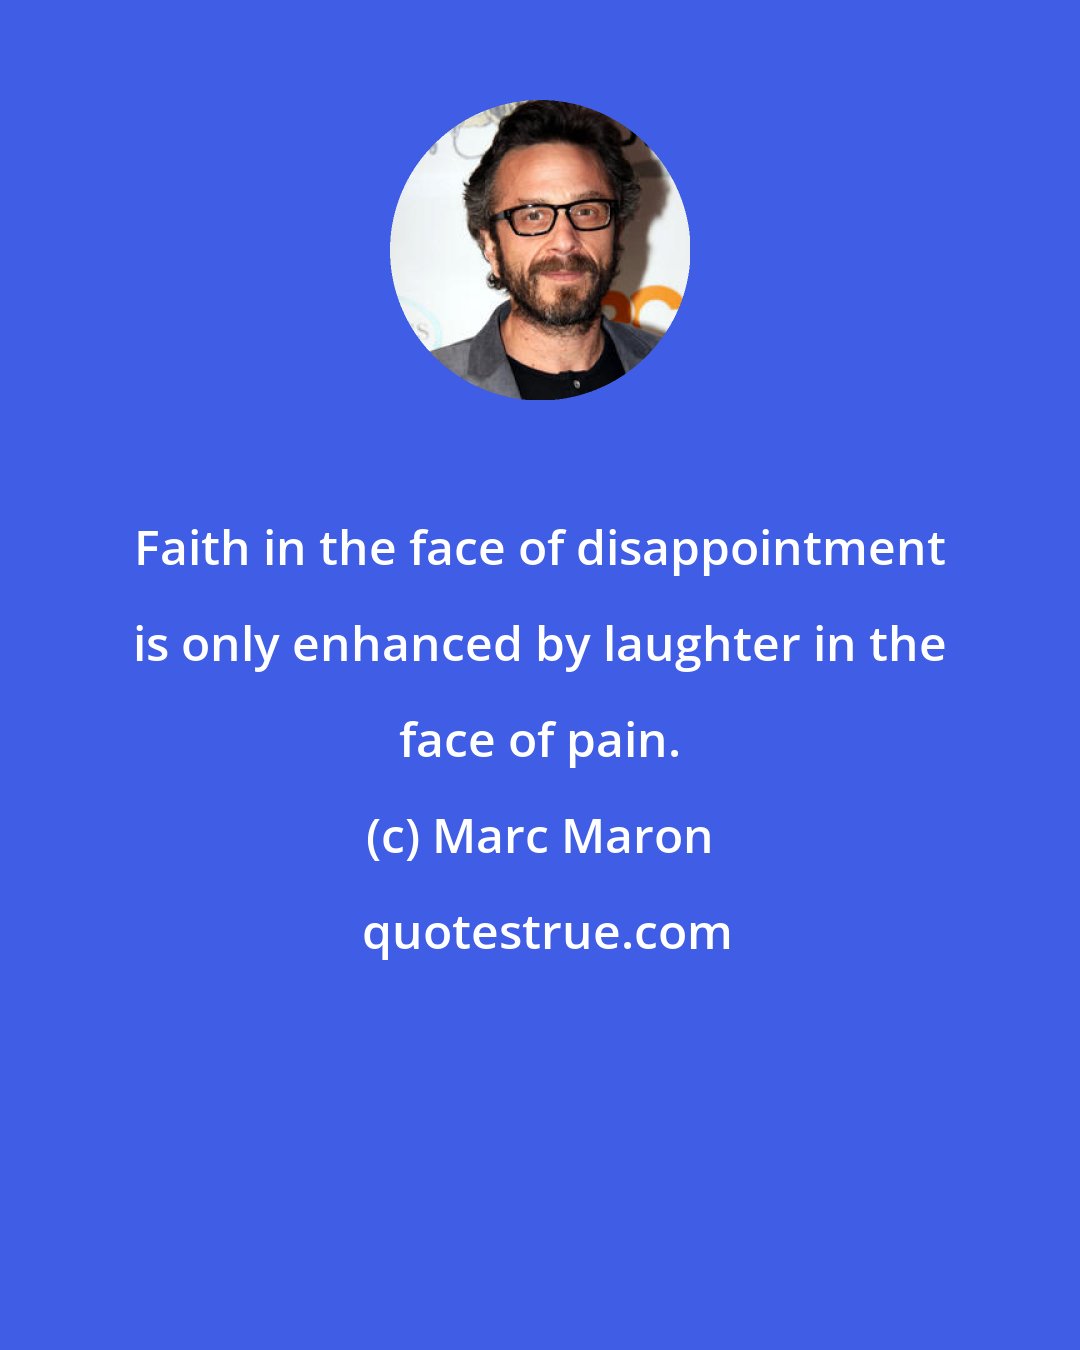 Marc Maron: Faith in the face of disappointment is only enhanced by laughter in the face of pain.